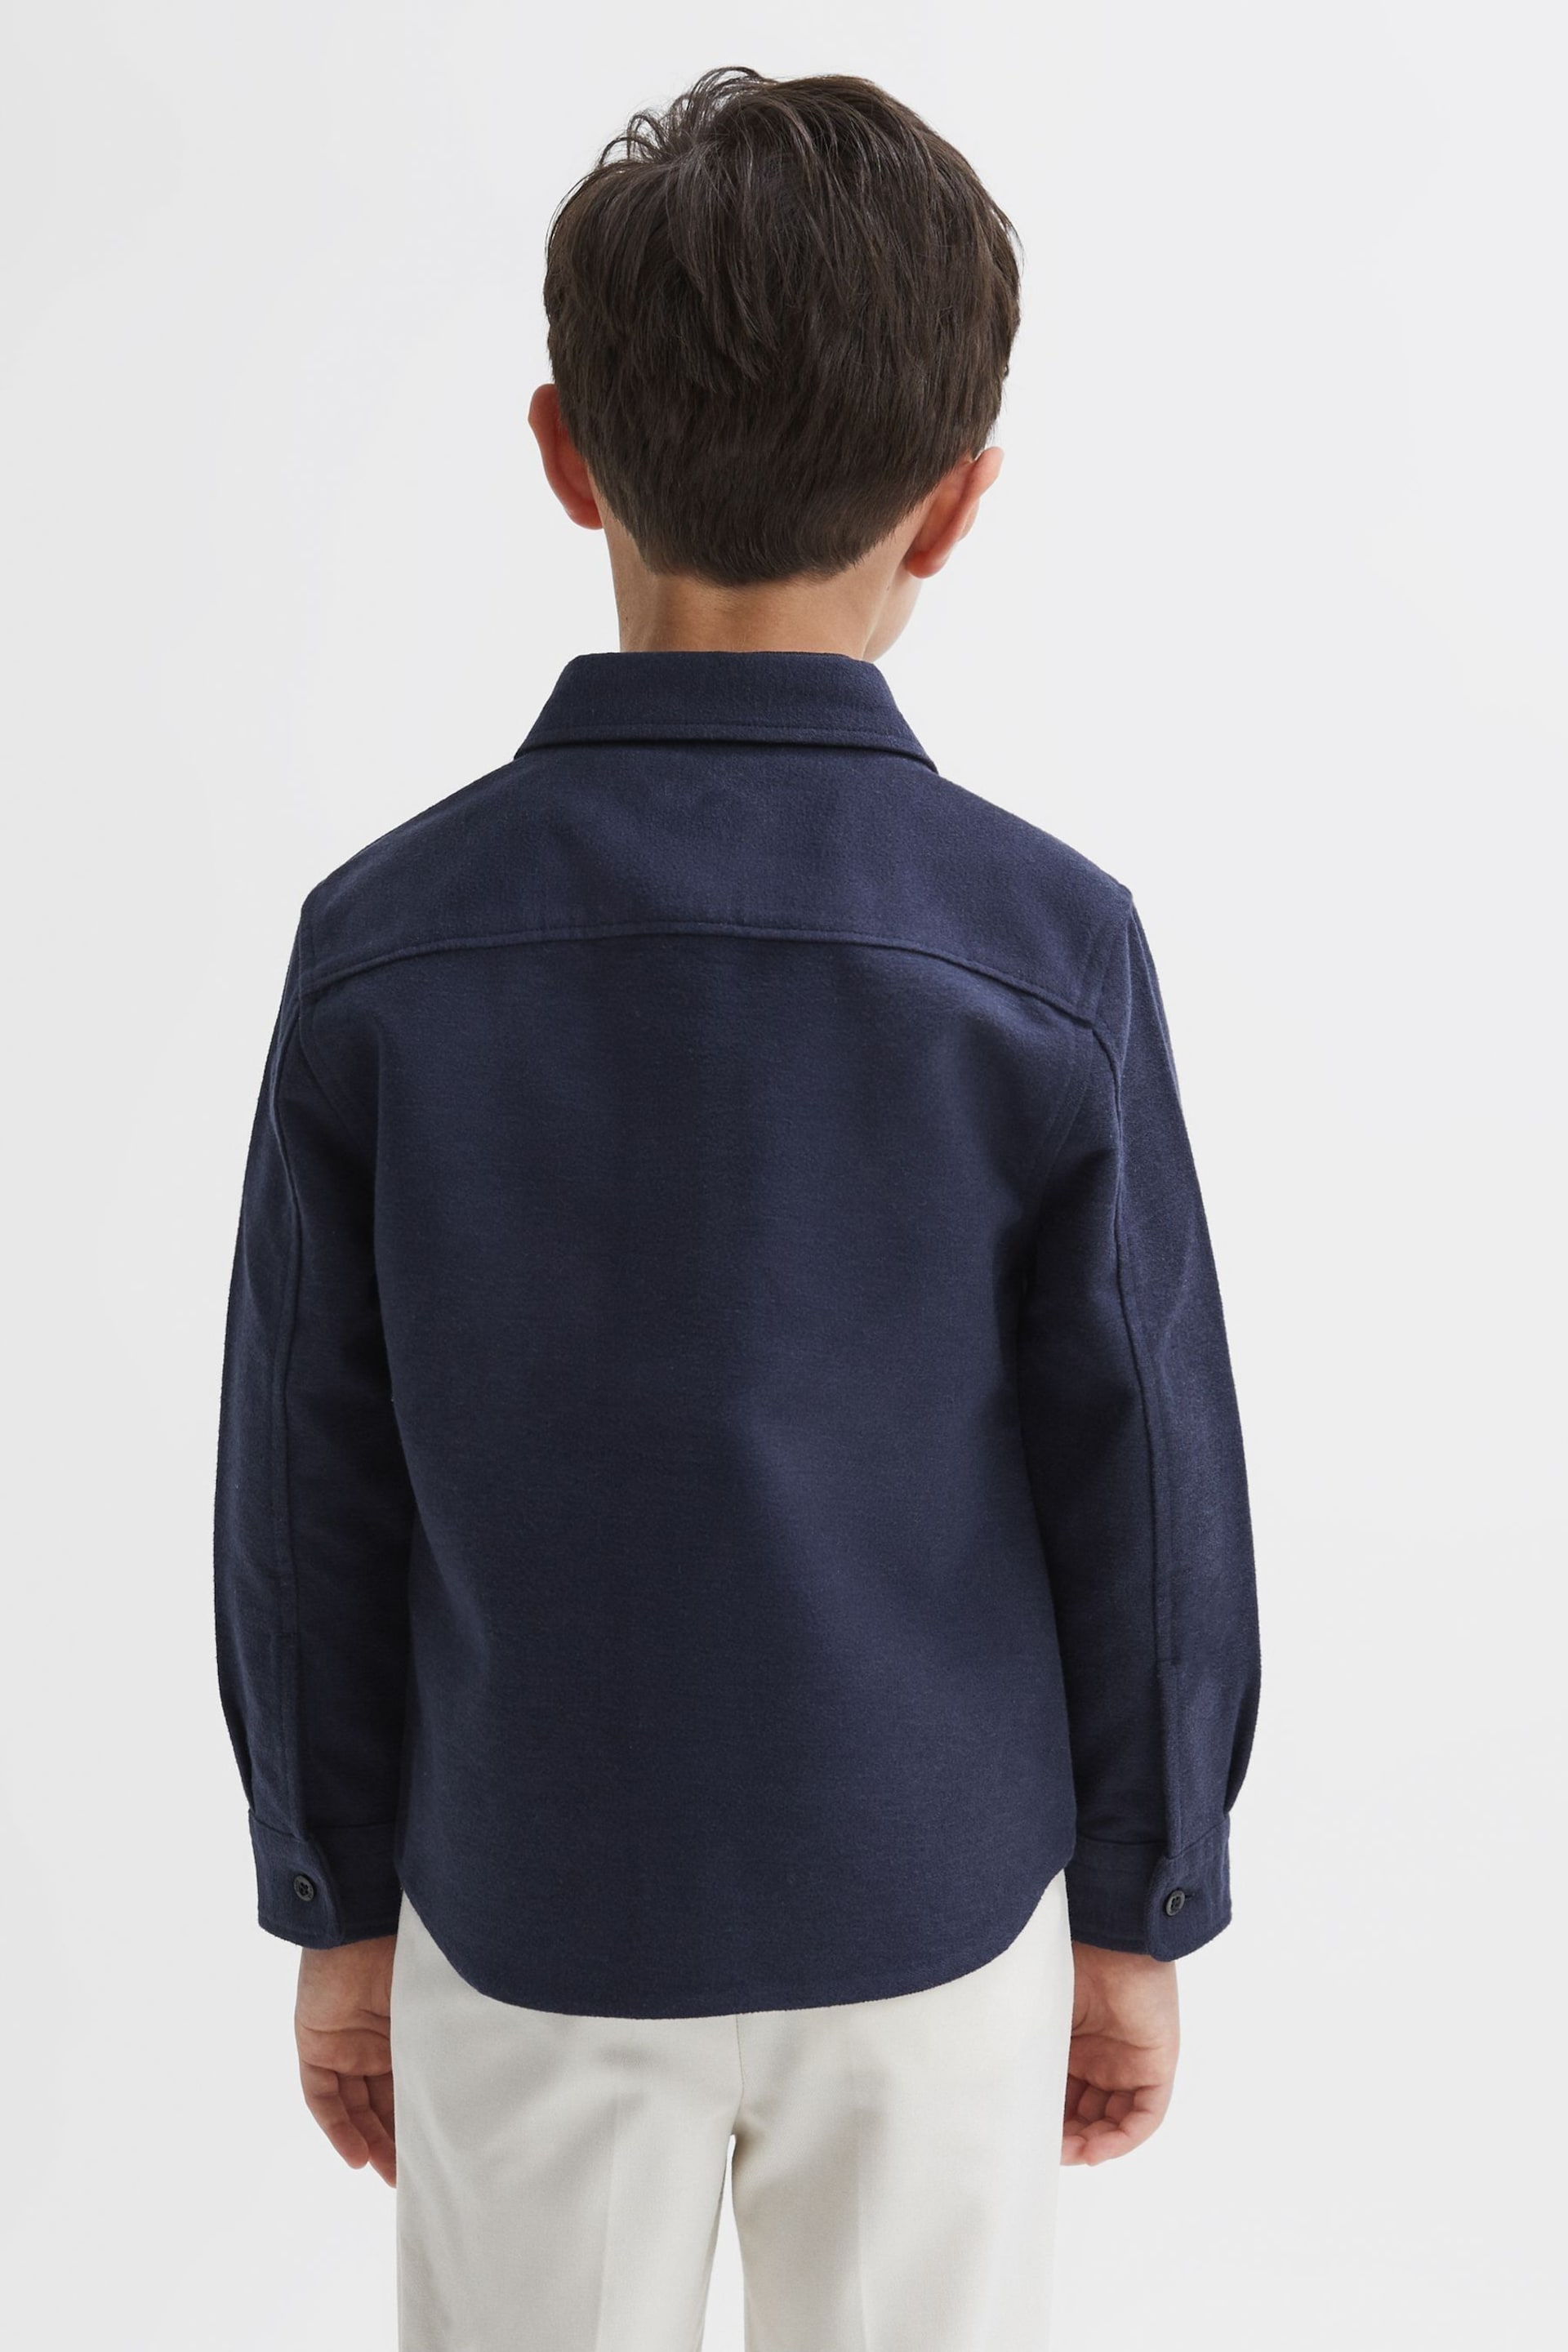 Reiss Eclipse Blue Thomas Junior Brushed Cotton Patch Pocket Overshirt - Image 5 of 6